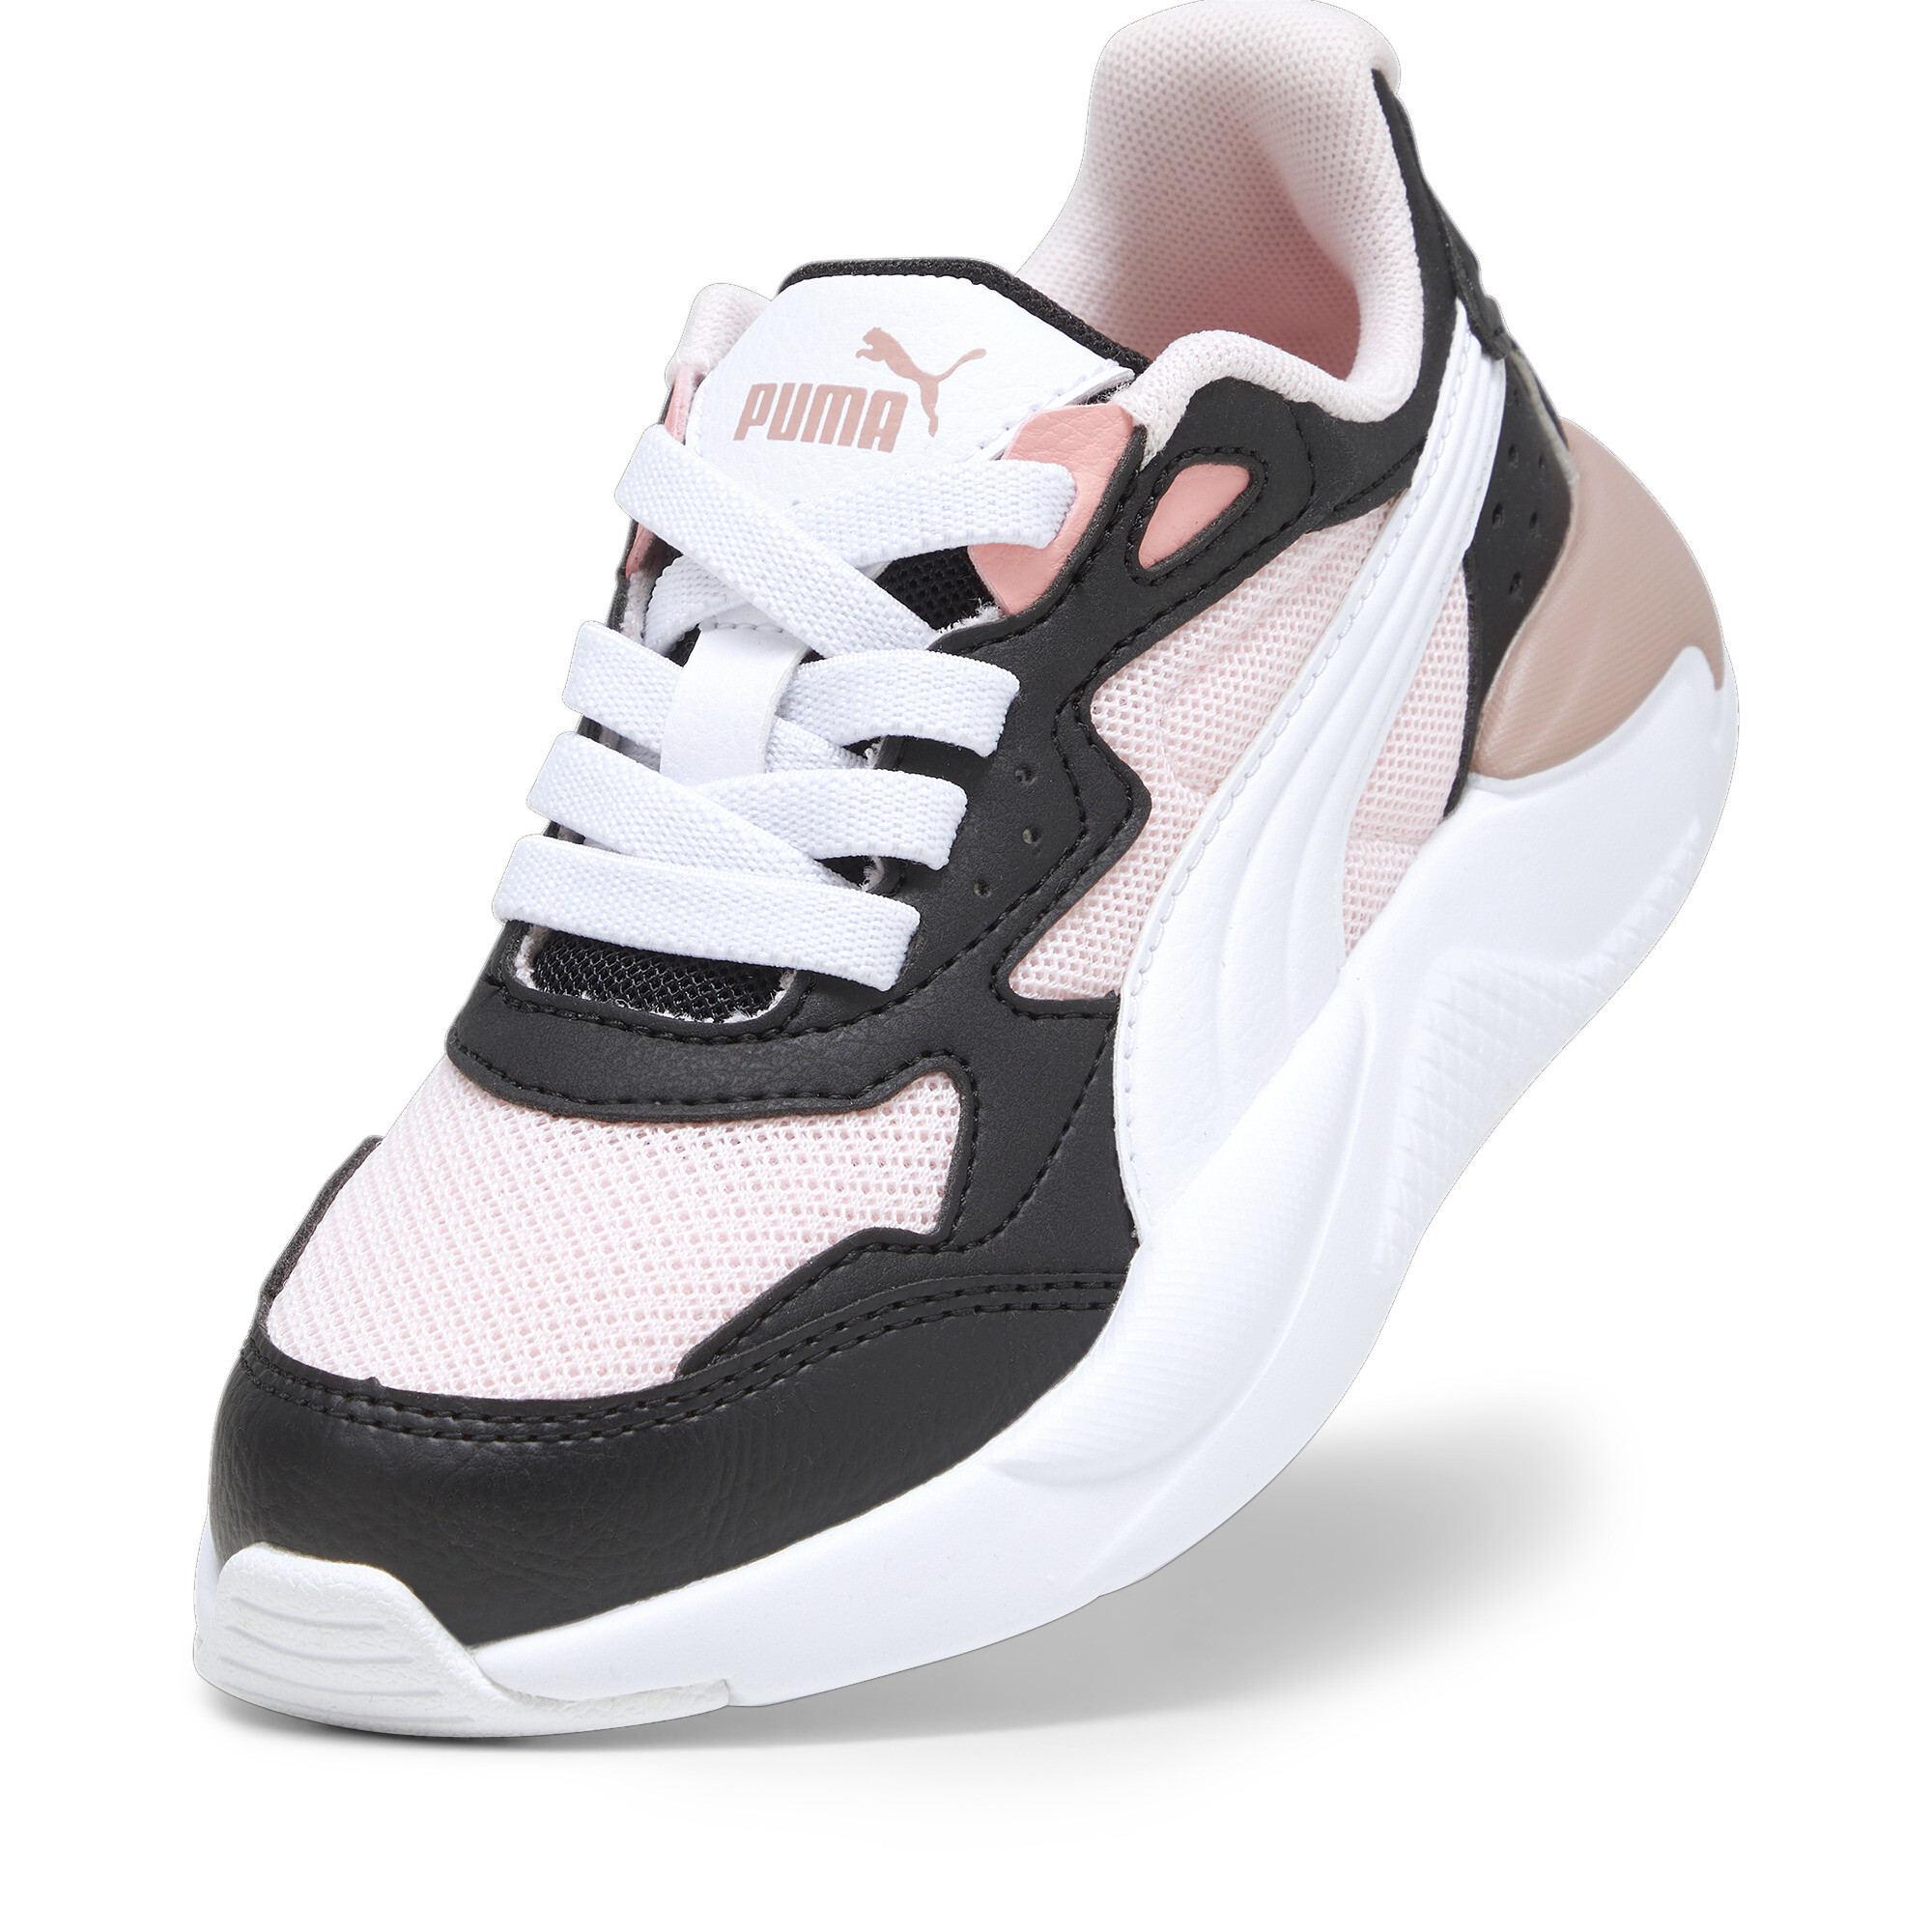 Puma X-Ray Speed AC Kids' Trainers, Pink, Size 34.5, Shoes